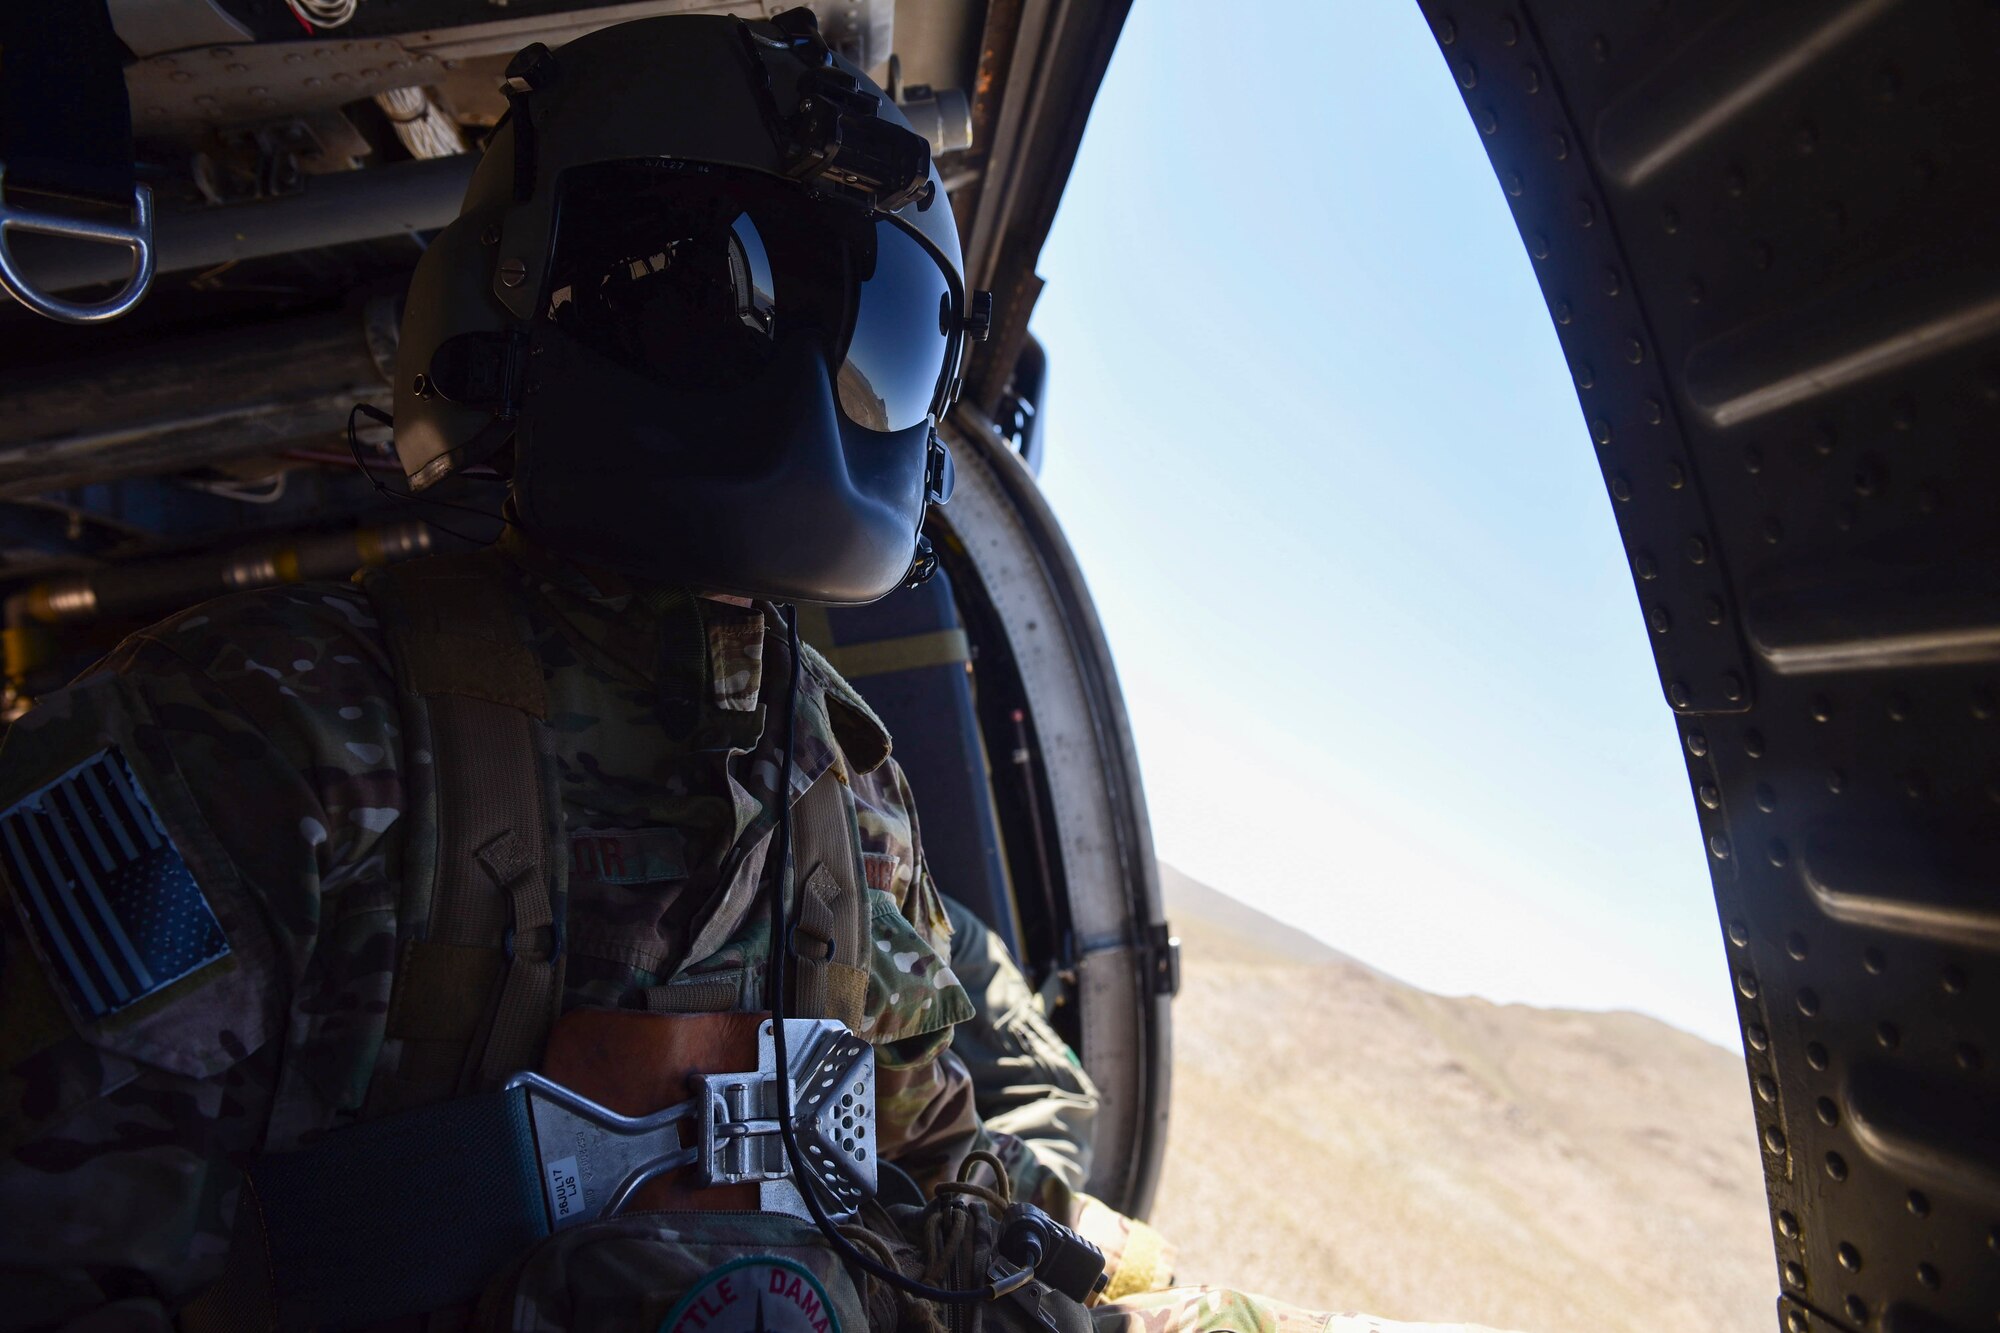 Tech. Sgt. Brandon Taylor, 34th Weapons Squadron special mission aviator, rides an HH-60G Pave Hawk helicopter during a Weapons School Integration mission at the Nevada Test and Training Range June 1, 2017. The HH-60 is the Air Force’s premier search and rescue helicopter and is also capable of providing humanitarian relief during natural disasters. (U.S. Air Force photo by Airman 1st Class Andrew D. Sarver/Released)